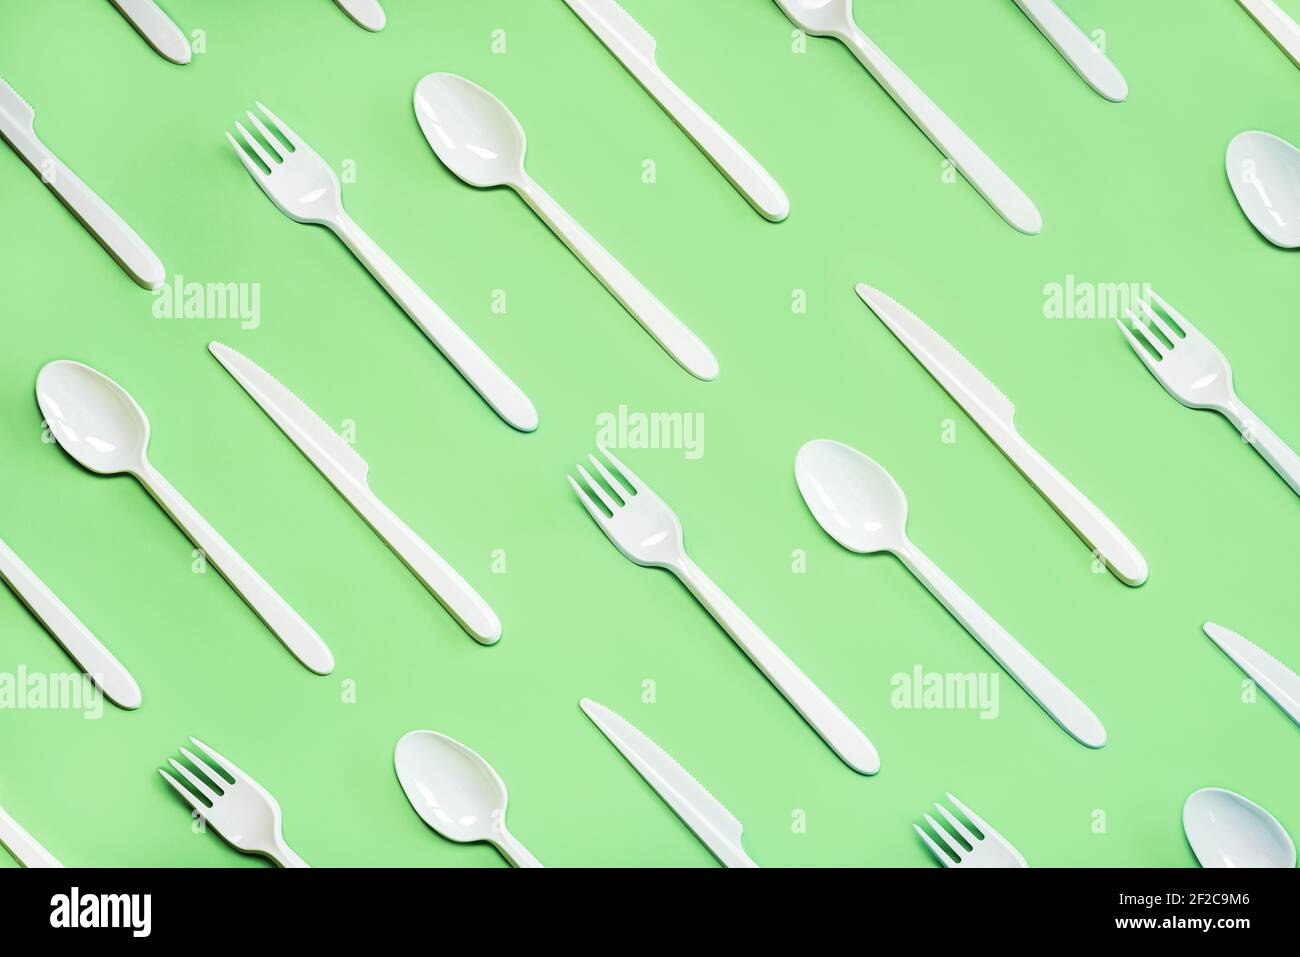 Geometric pattern made with white plastic cutlery on a green background Stock Photo